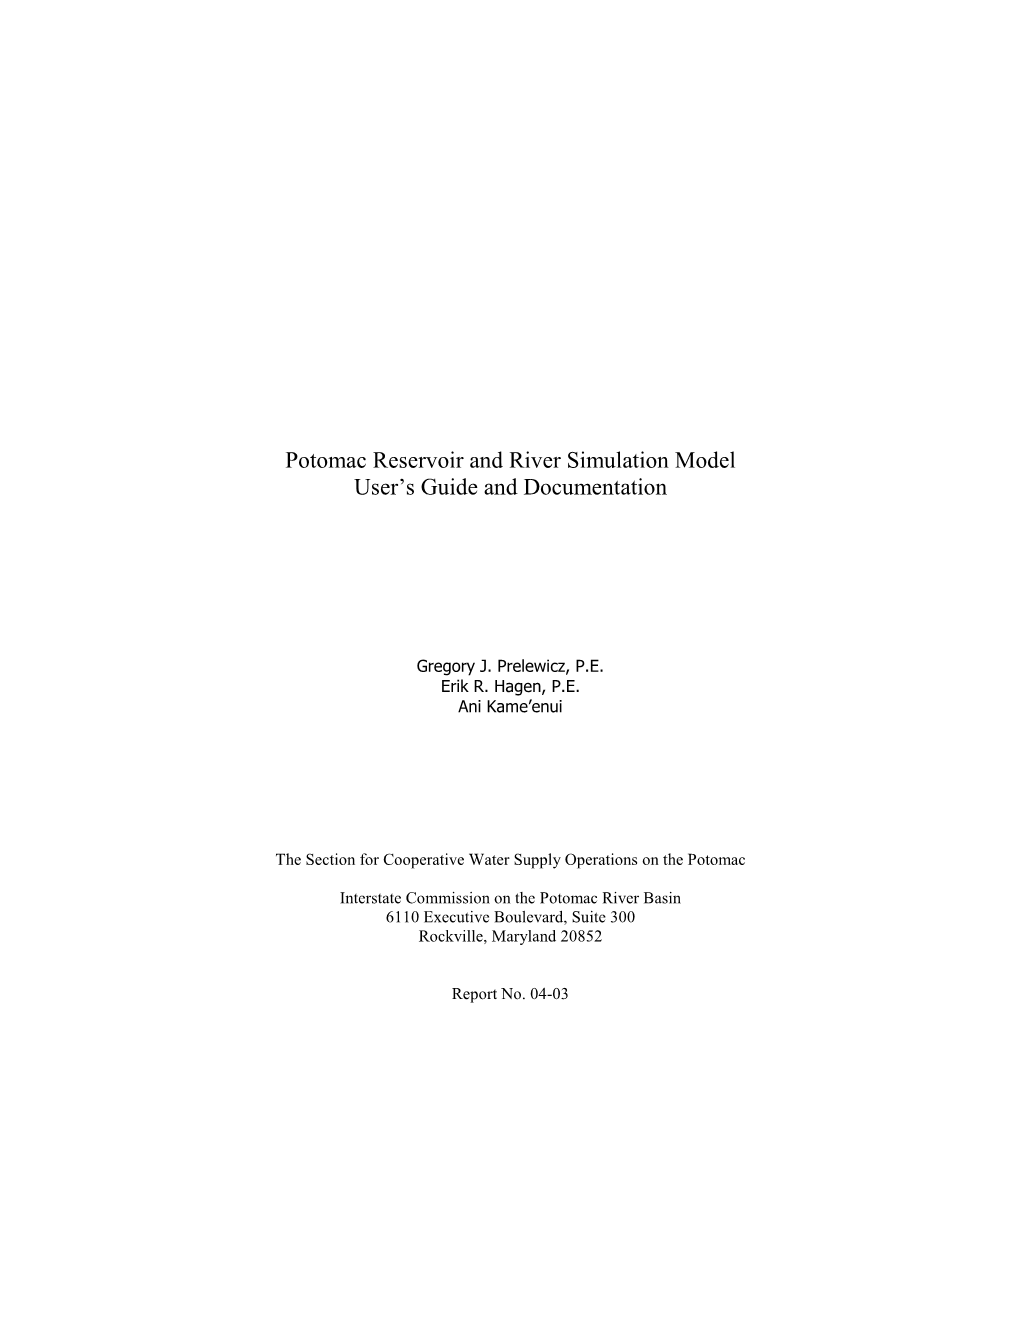 Potomac Reservoir and River Simulation Model User's Guide and Documentation